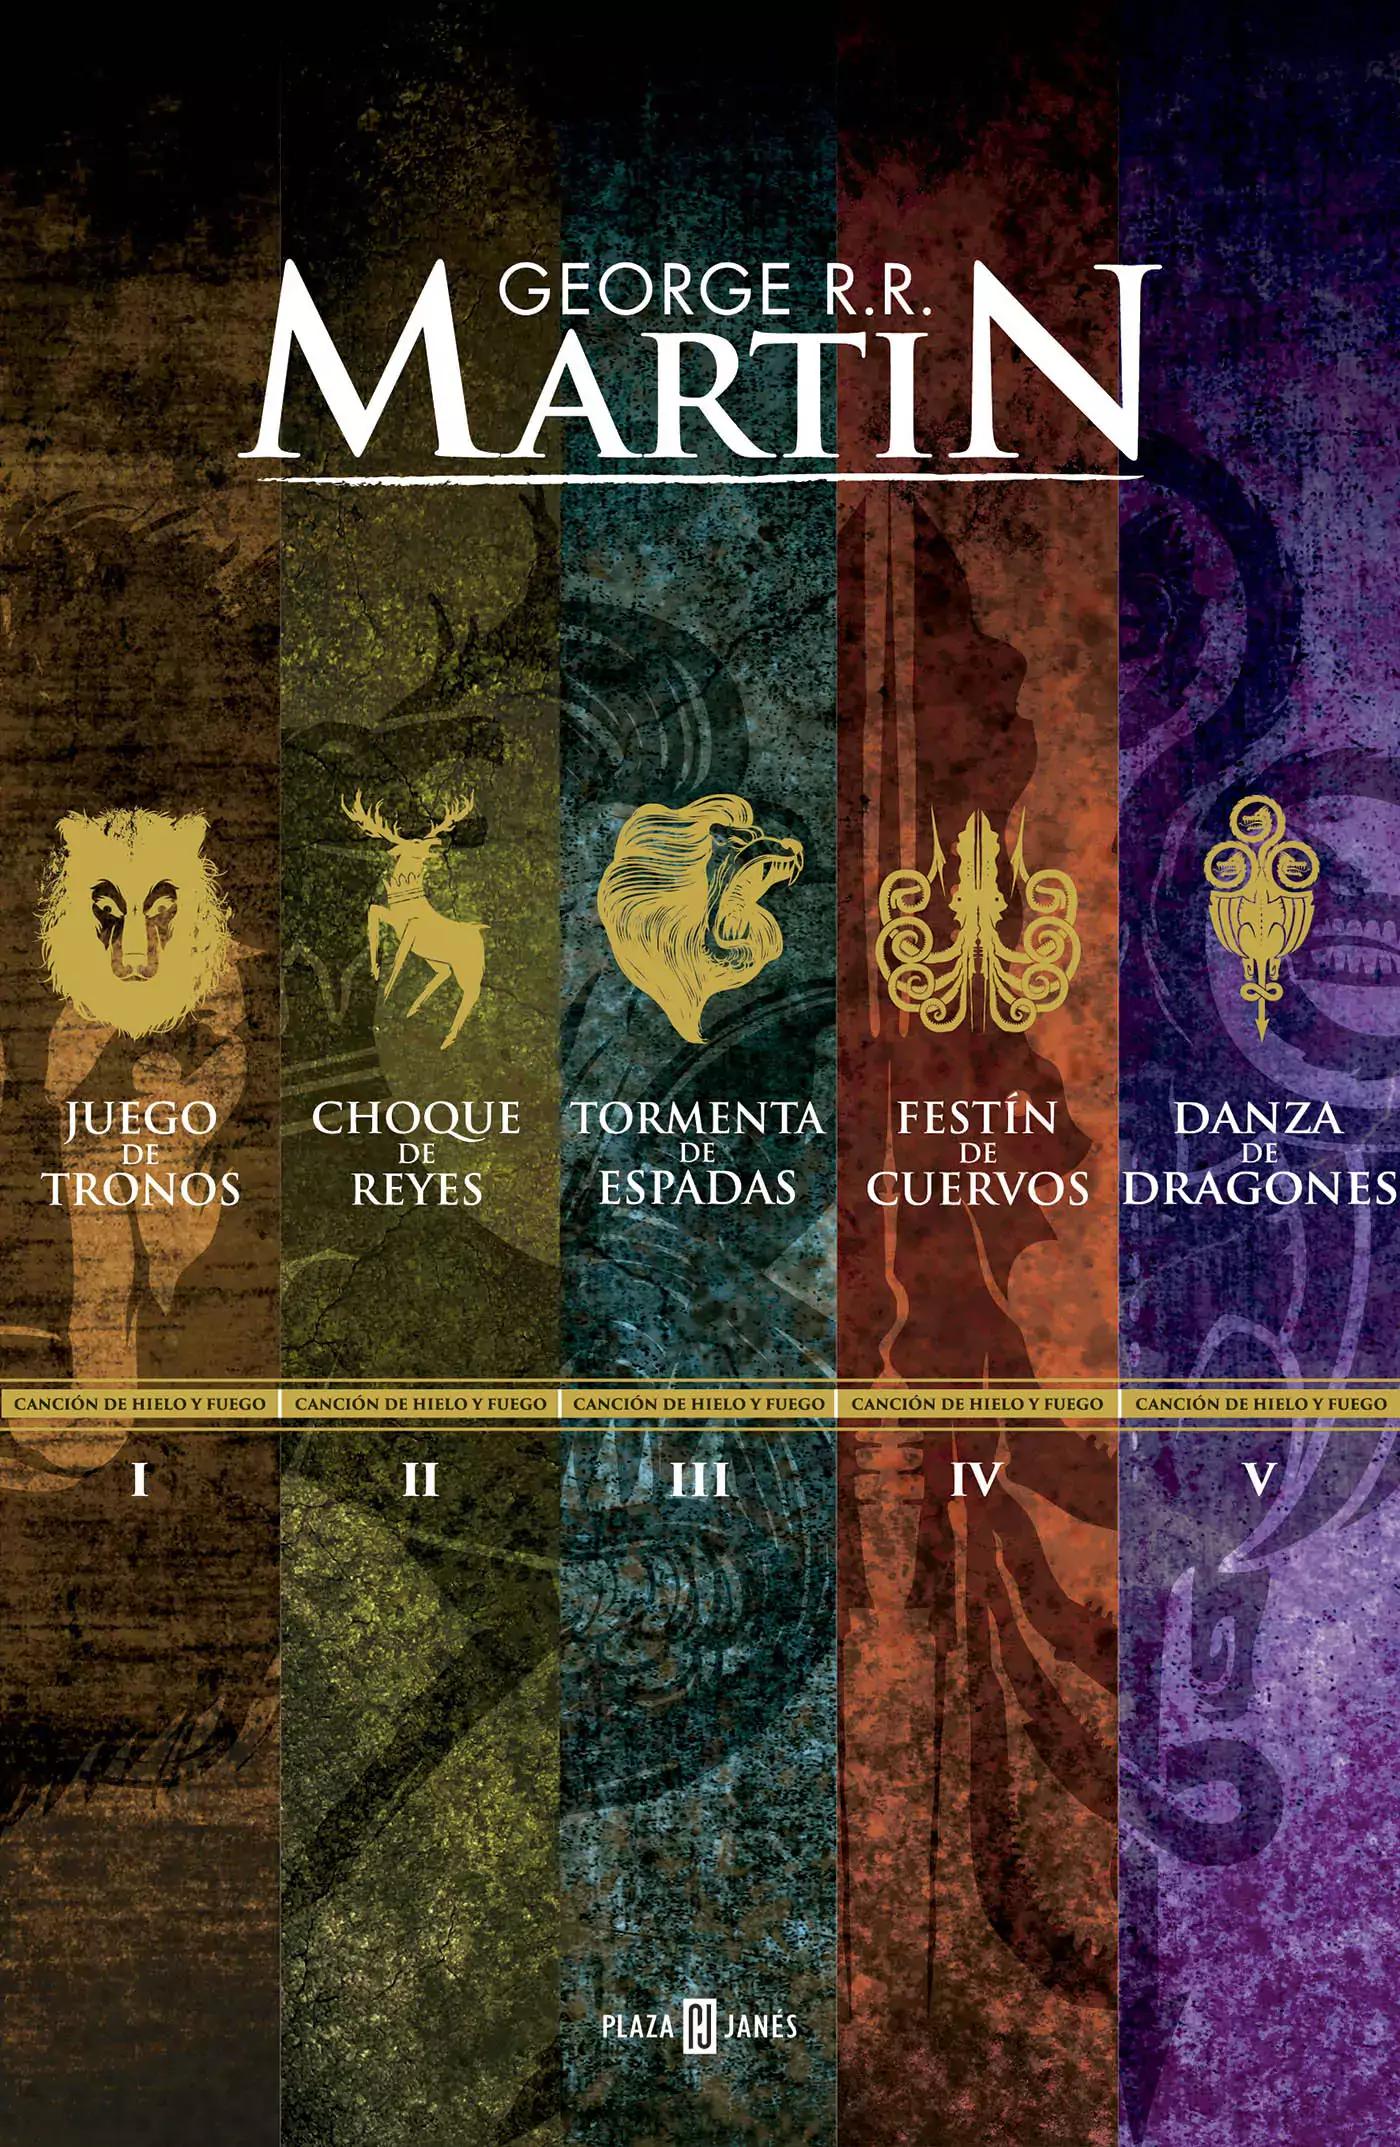 "A Song of Ice and Fire" by George R.R. Martin